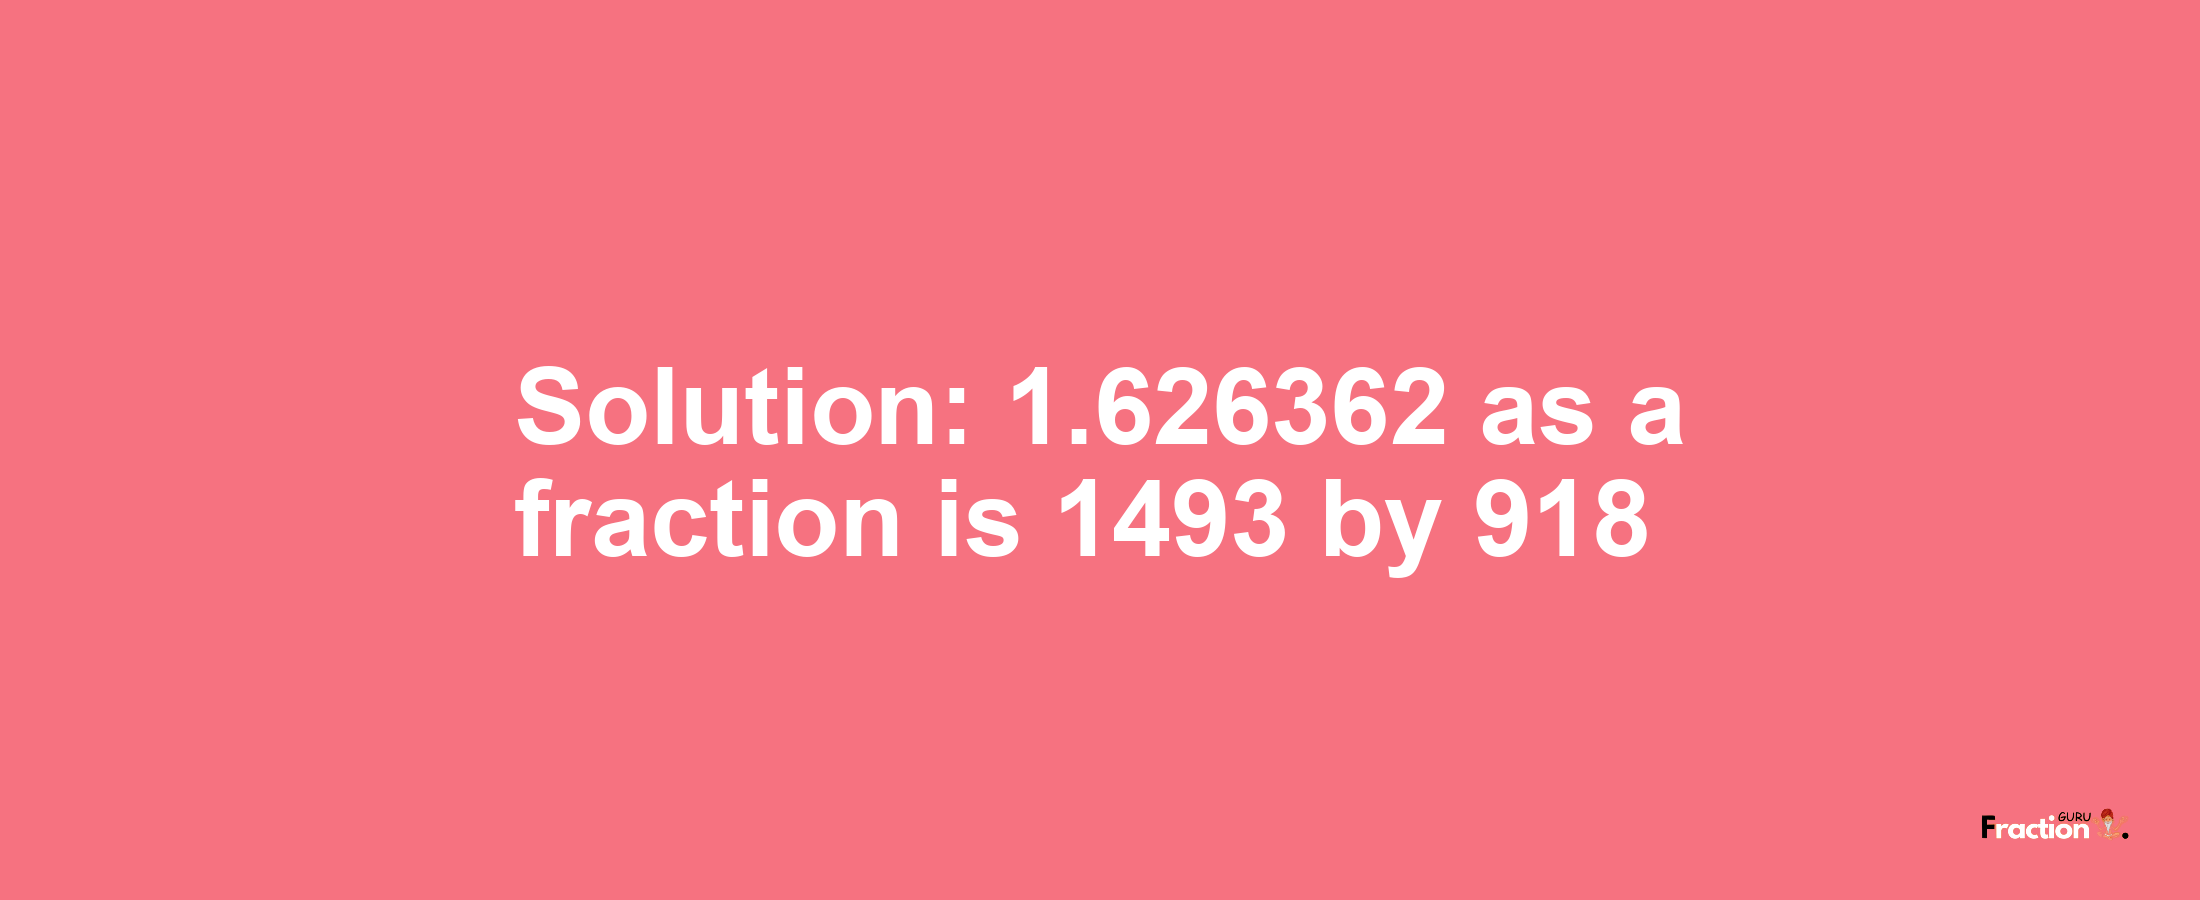 Solution:1.626362 as a fraction is 1493/918